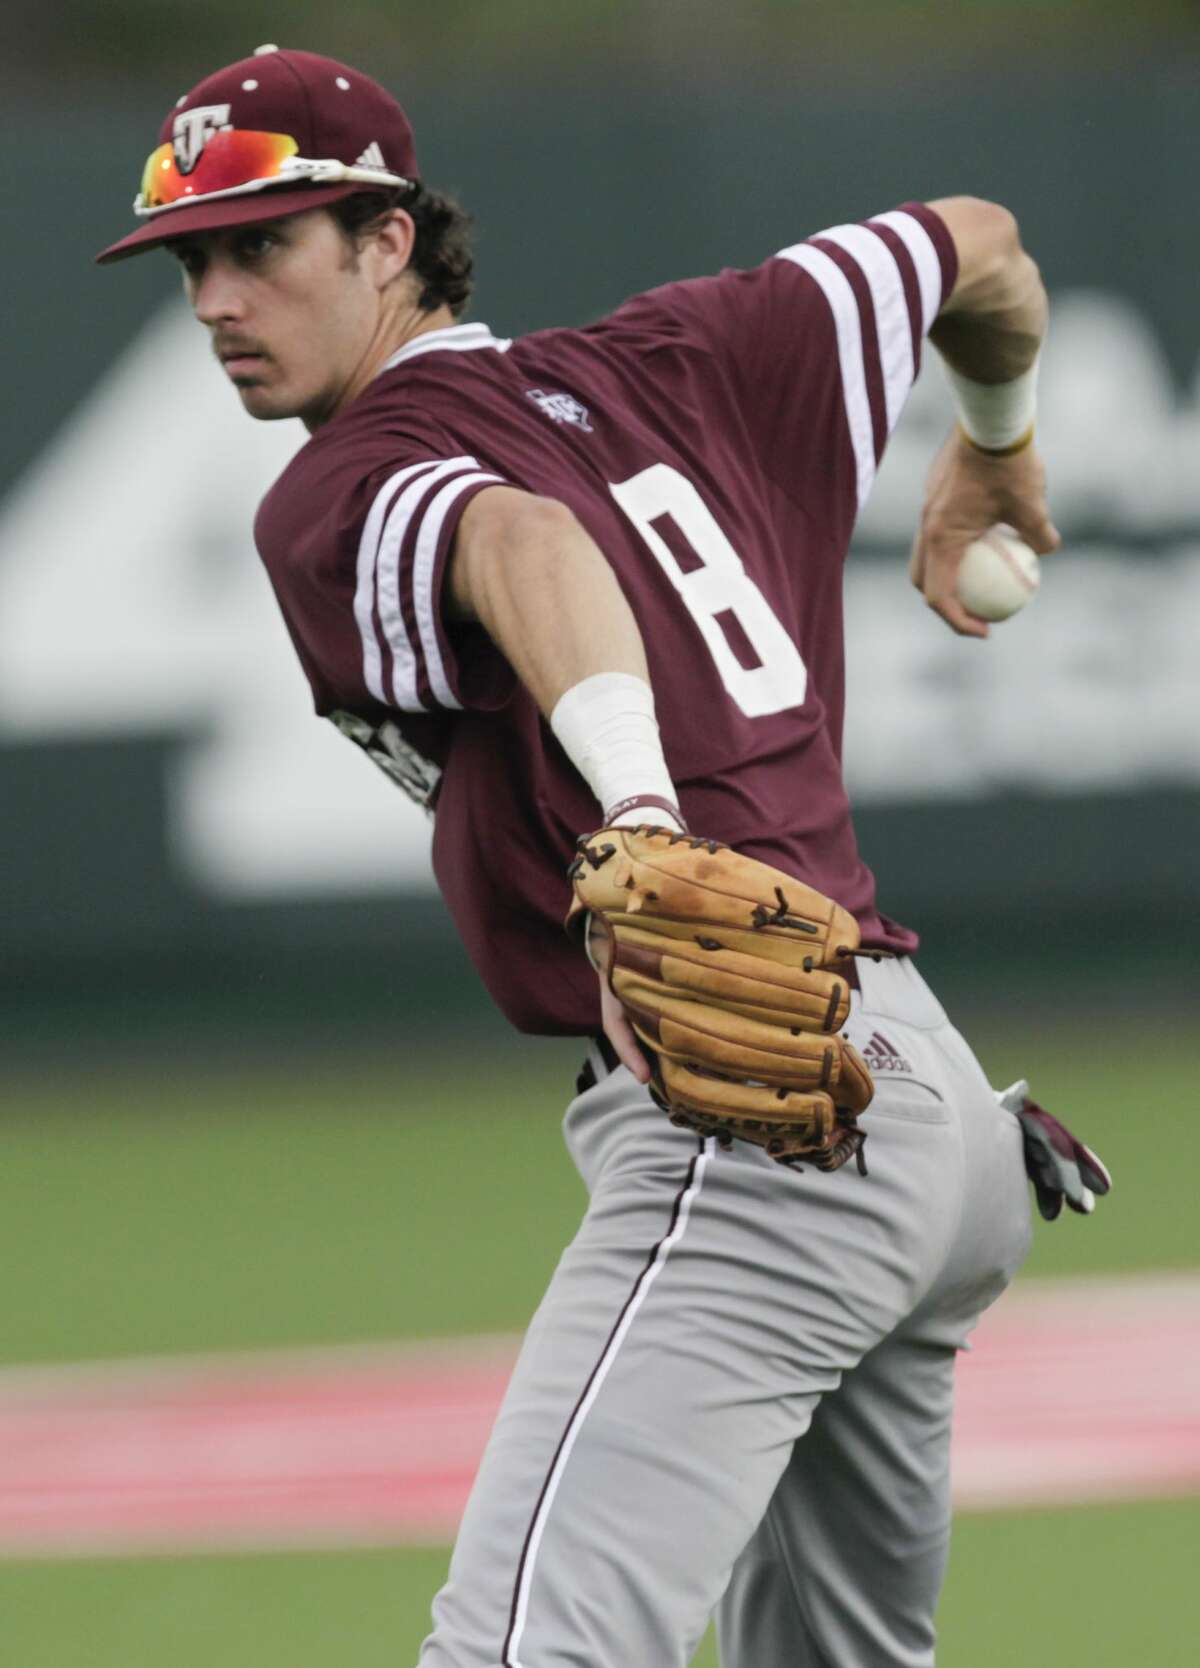 Texas A&M second baseman Braden Shewmake (8) throws the ball to first base to out a Baylor player during the 2017 NCAA Regional game at Darryl and Lori Schroeder Park Friday, June 2, 2017, in Houston. ( Yi-Chin Lee / Houston Chronicle )